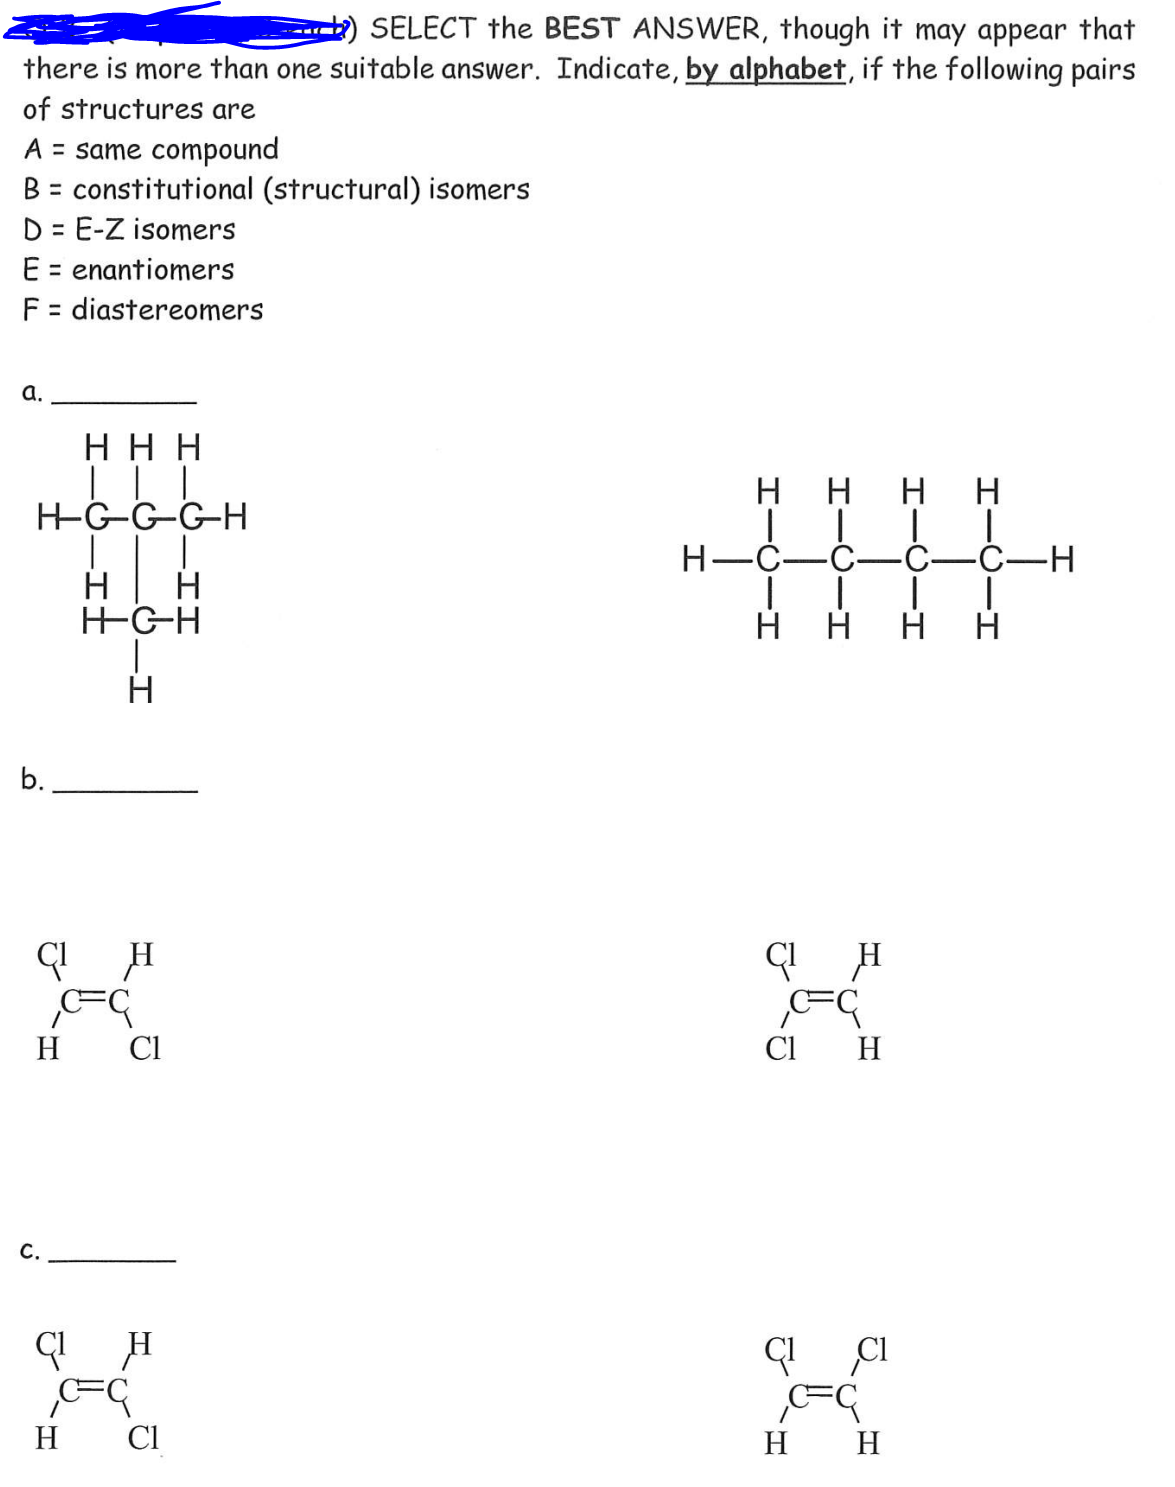 SELECT the BEST ANSWER, though it may appear that
there is more than one suitable answer. Indicate, by alphabet, if the following pairs
of structures are
A = same compound
B = constitutional (structural) isomers
D = E-Z isomers
E = enantiomers
F = diastereomers
%3D
a.
H H H
нн
H H
Н—С—С—С—С—Н
H
H
HGH
H H H H
b.
H
Cl
Cl
H
C.
H
Cl
H H
